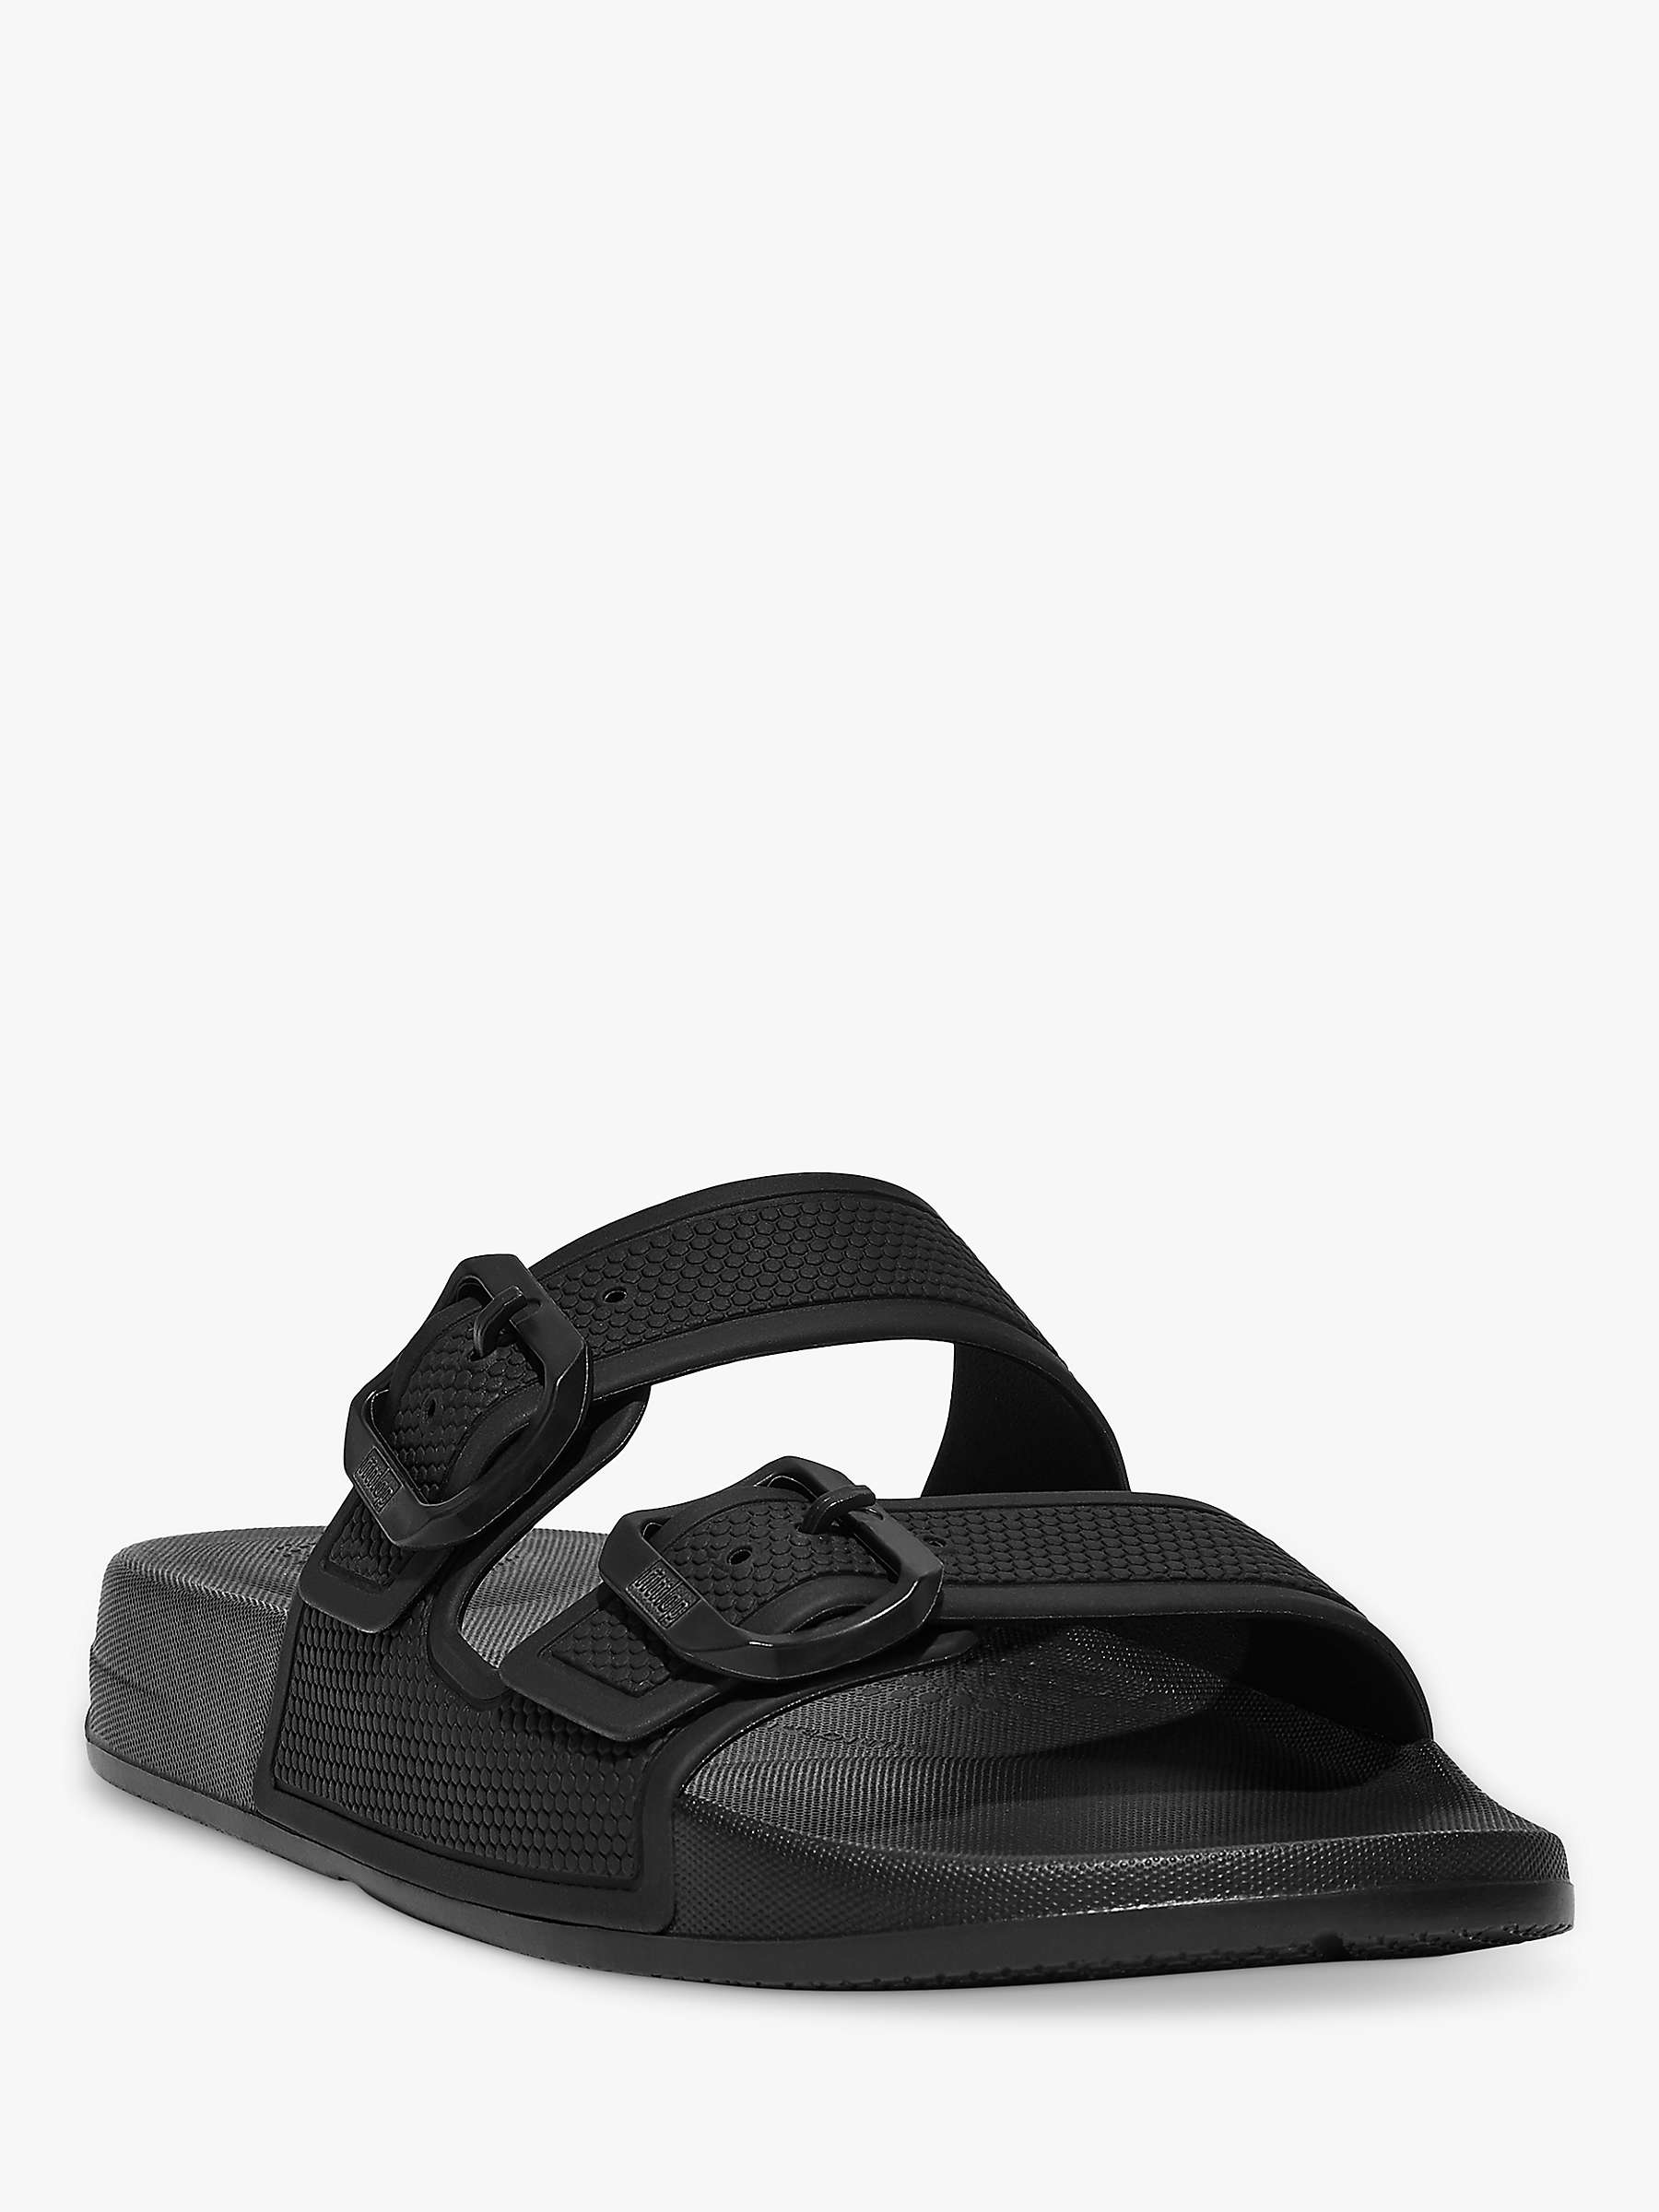 FitFlop IQushion Slider Sandals, All Black at John Lewis & Partners